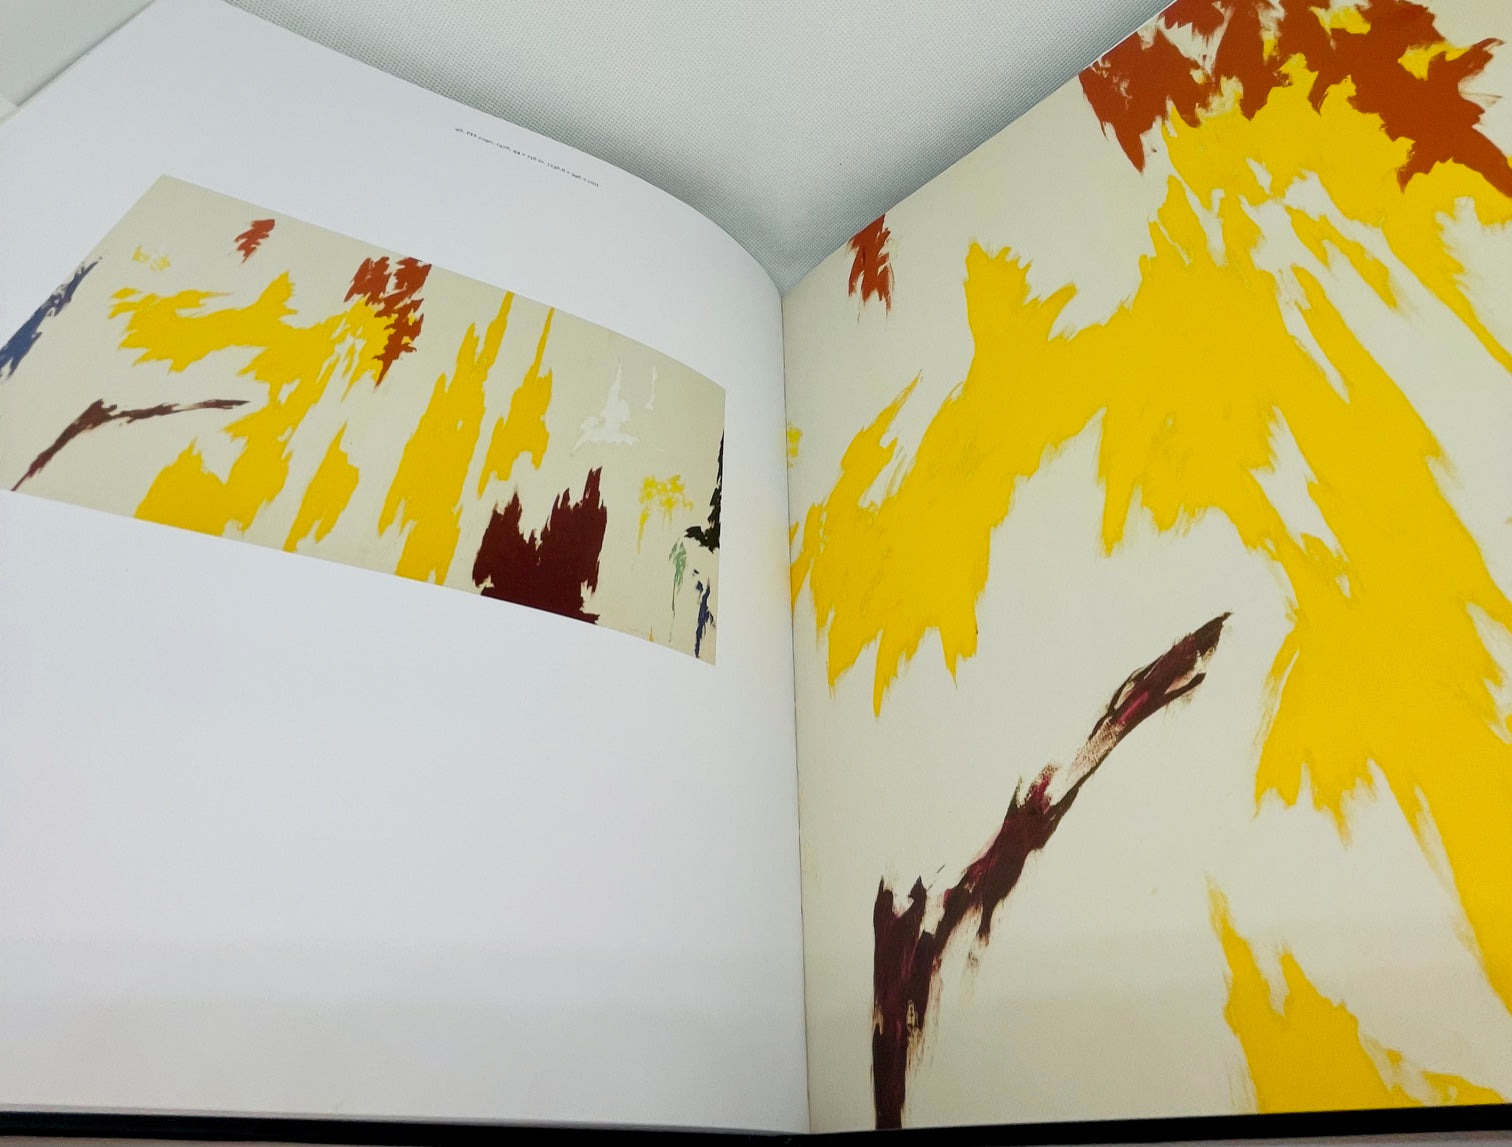 Open book with a full abstract painting on the left page and a closeup of the painting on the right page featuring abstract yellow, red, and dark red shapes